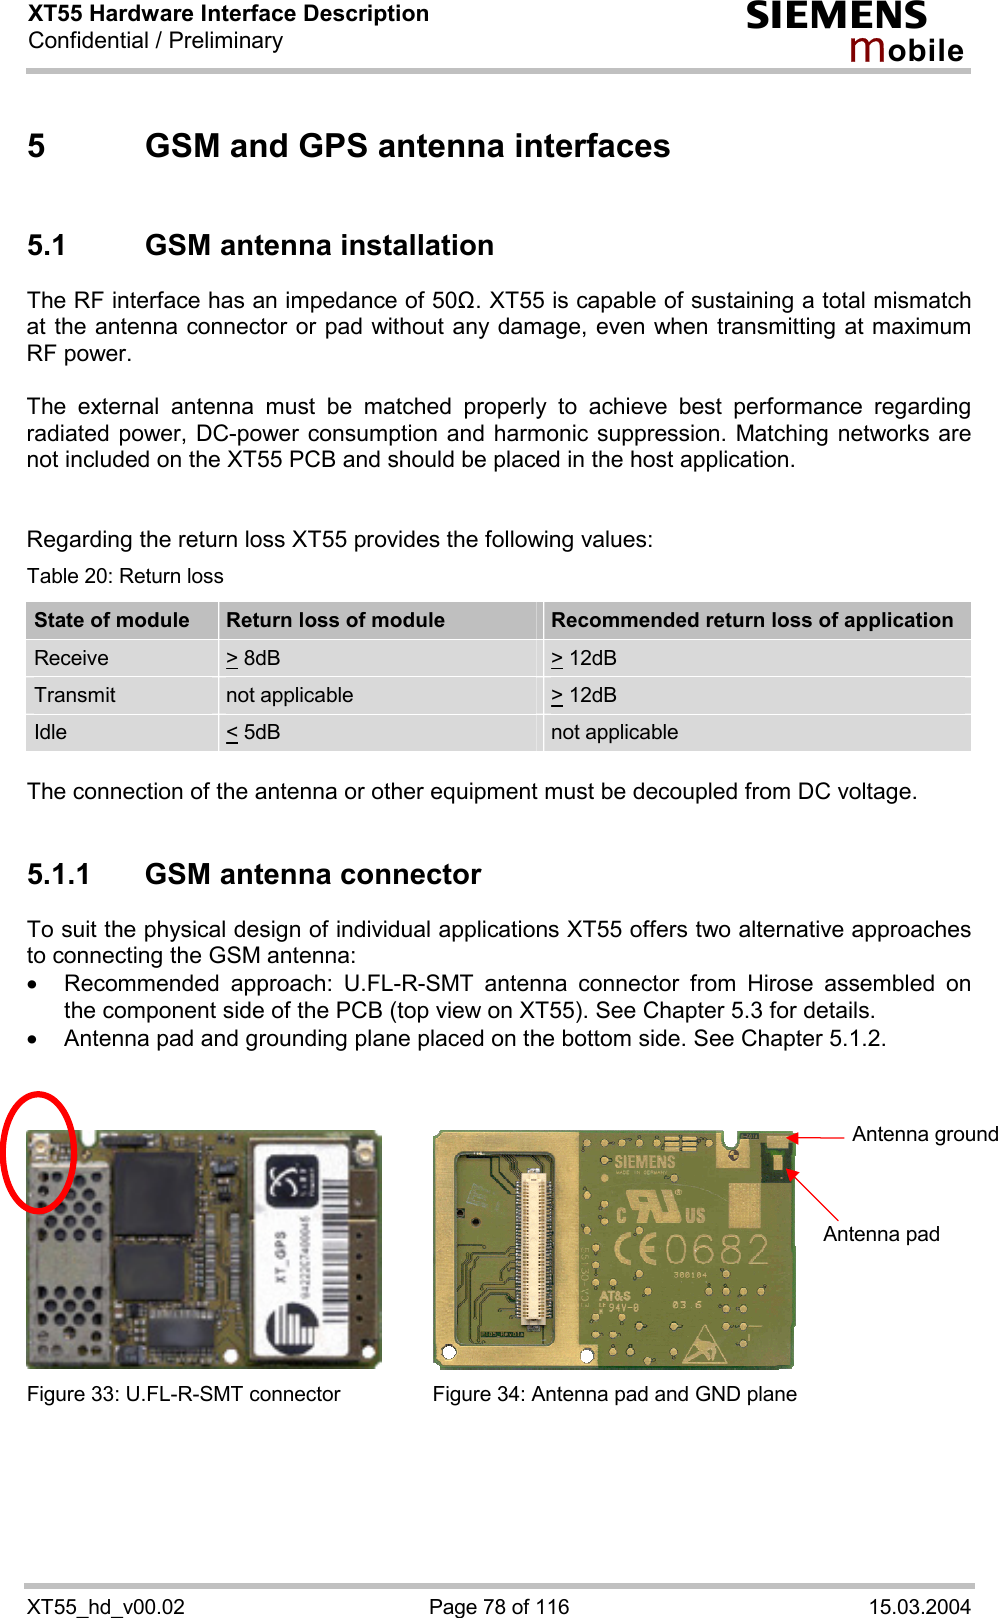 XT55 Hardware Interface Description Confidential / Preliminary s mo b i l e XT55_hd_v00.02  Page 78 of 116  15.03.2004 5  GSM and GPS antenna interfaces 5.1  GSM antenna installation The RF interface has an impedance of 50&quot;. XT55 is capable of sustaining a total mismatch at the antenna connector or pad without any damage, even when transmitting at maximum RF power.   The external antenna must be matched properly to achieve best performance regarding radiated power, DC-power consumption and harmonic suppression. Matching networks are not included on the XT55 PCB and should be placed in the host application.    Regarding the return loss XT55 provides the following values: Table 20: Return loss State of module  Return loss of module  Recommended return loss of application Receive  &gt; 8dB  &gt; 12dB  Transmit   not applicable   &gt; 12dB  Idle  &lt; 5dB   not applicable  The connection of the antenna or other equipment must be decoupled from DC voltage.  5.1.1  GSM antenna connector To suit the physical design of individual applications XT55 offers two alternative approaches to connecting the GSM antenna:  ·  Recommended approach: U.FL-R-SMT antenna connector from Hirose assembled on the component side of the PCB (top view on XT55). See Chapter 5.3 for details. ·  Antenna pad and grounding plane placed on the bottom side. See Chapter 5.1.2.       Figure 33: U.FL-R-SMT connector  Figure 34: Antenna pad and GND plane   Antenna pad Antenna ground 